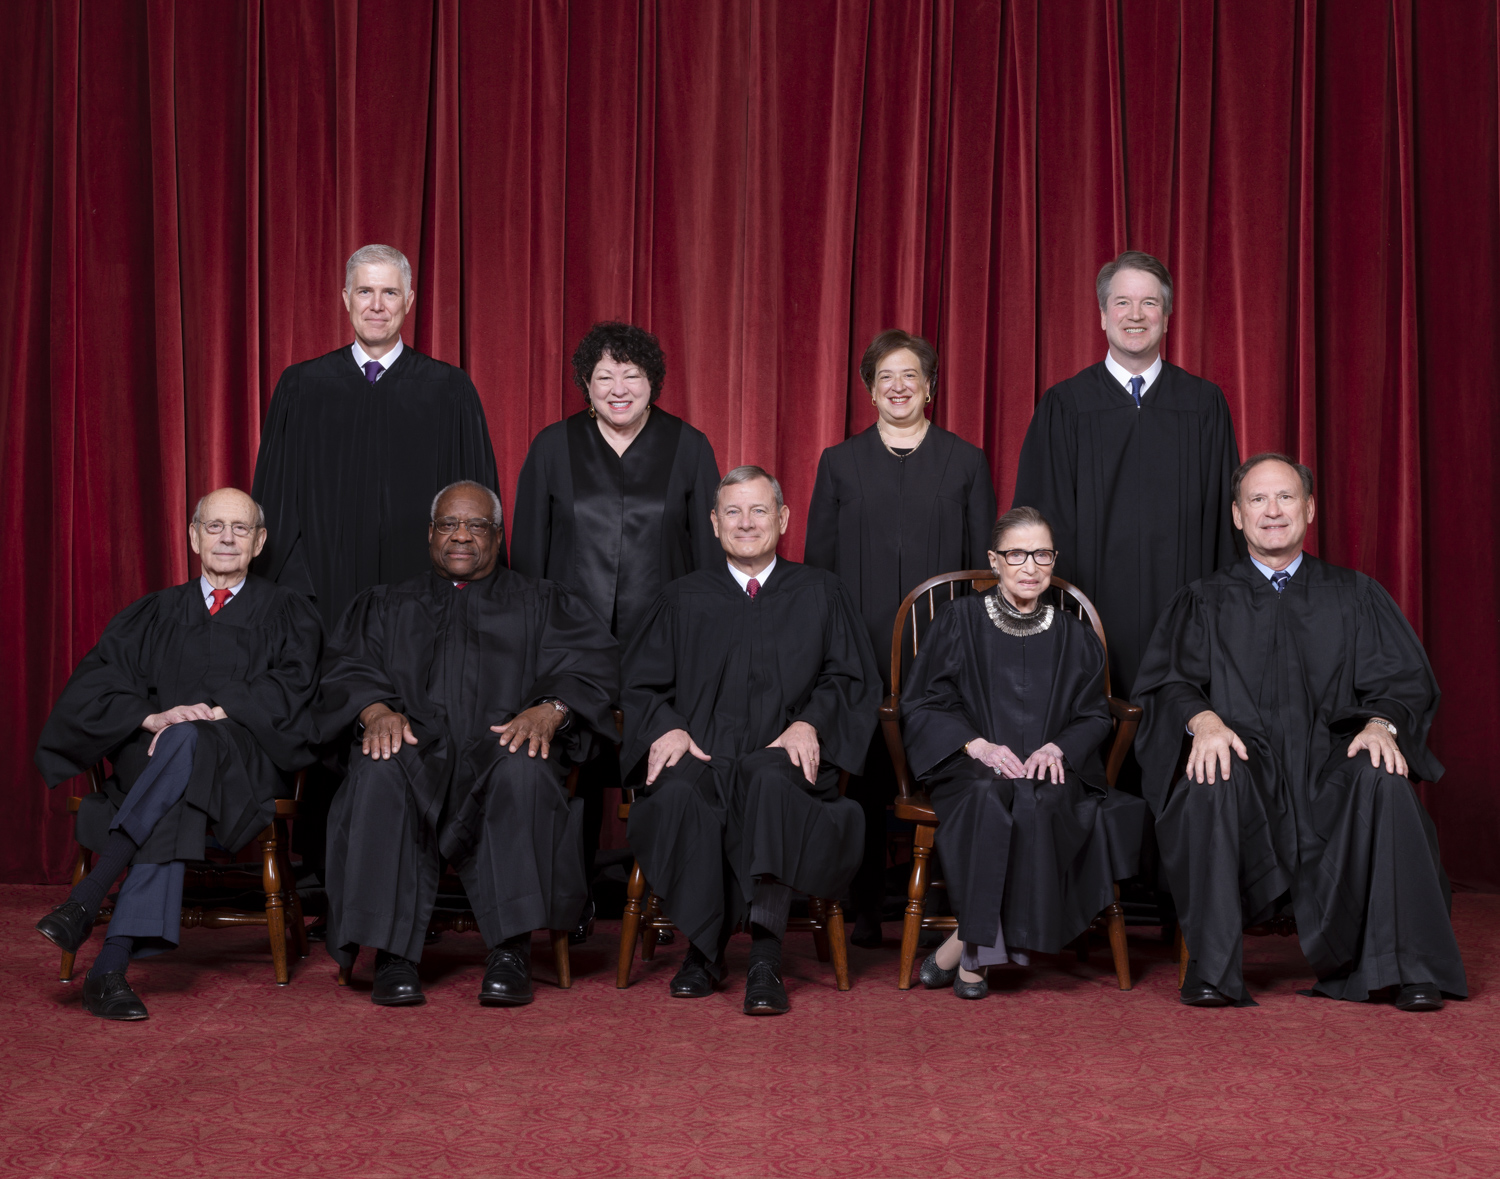 pictures of current supreme court justices